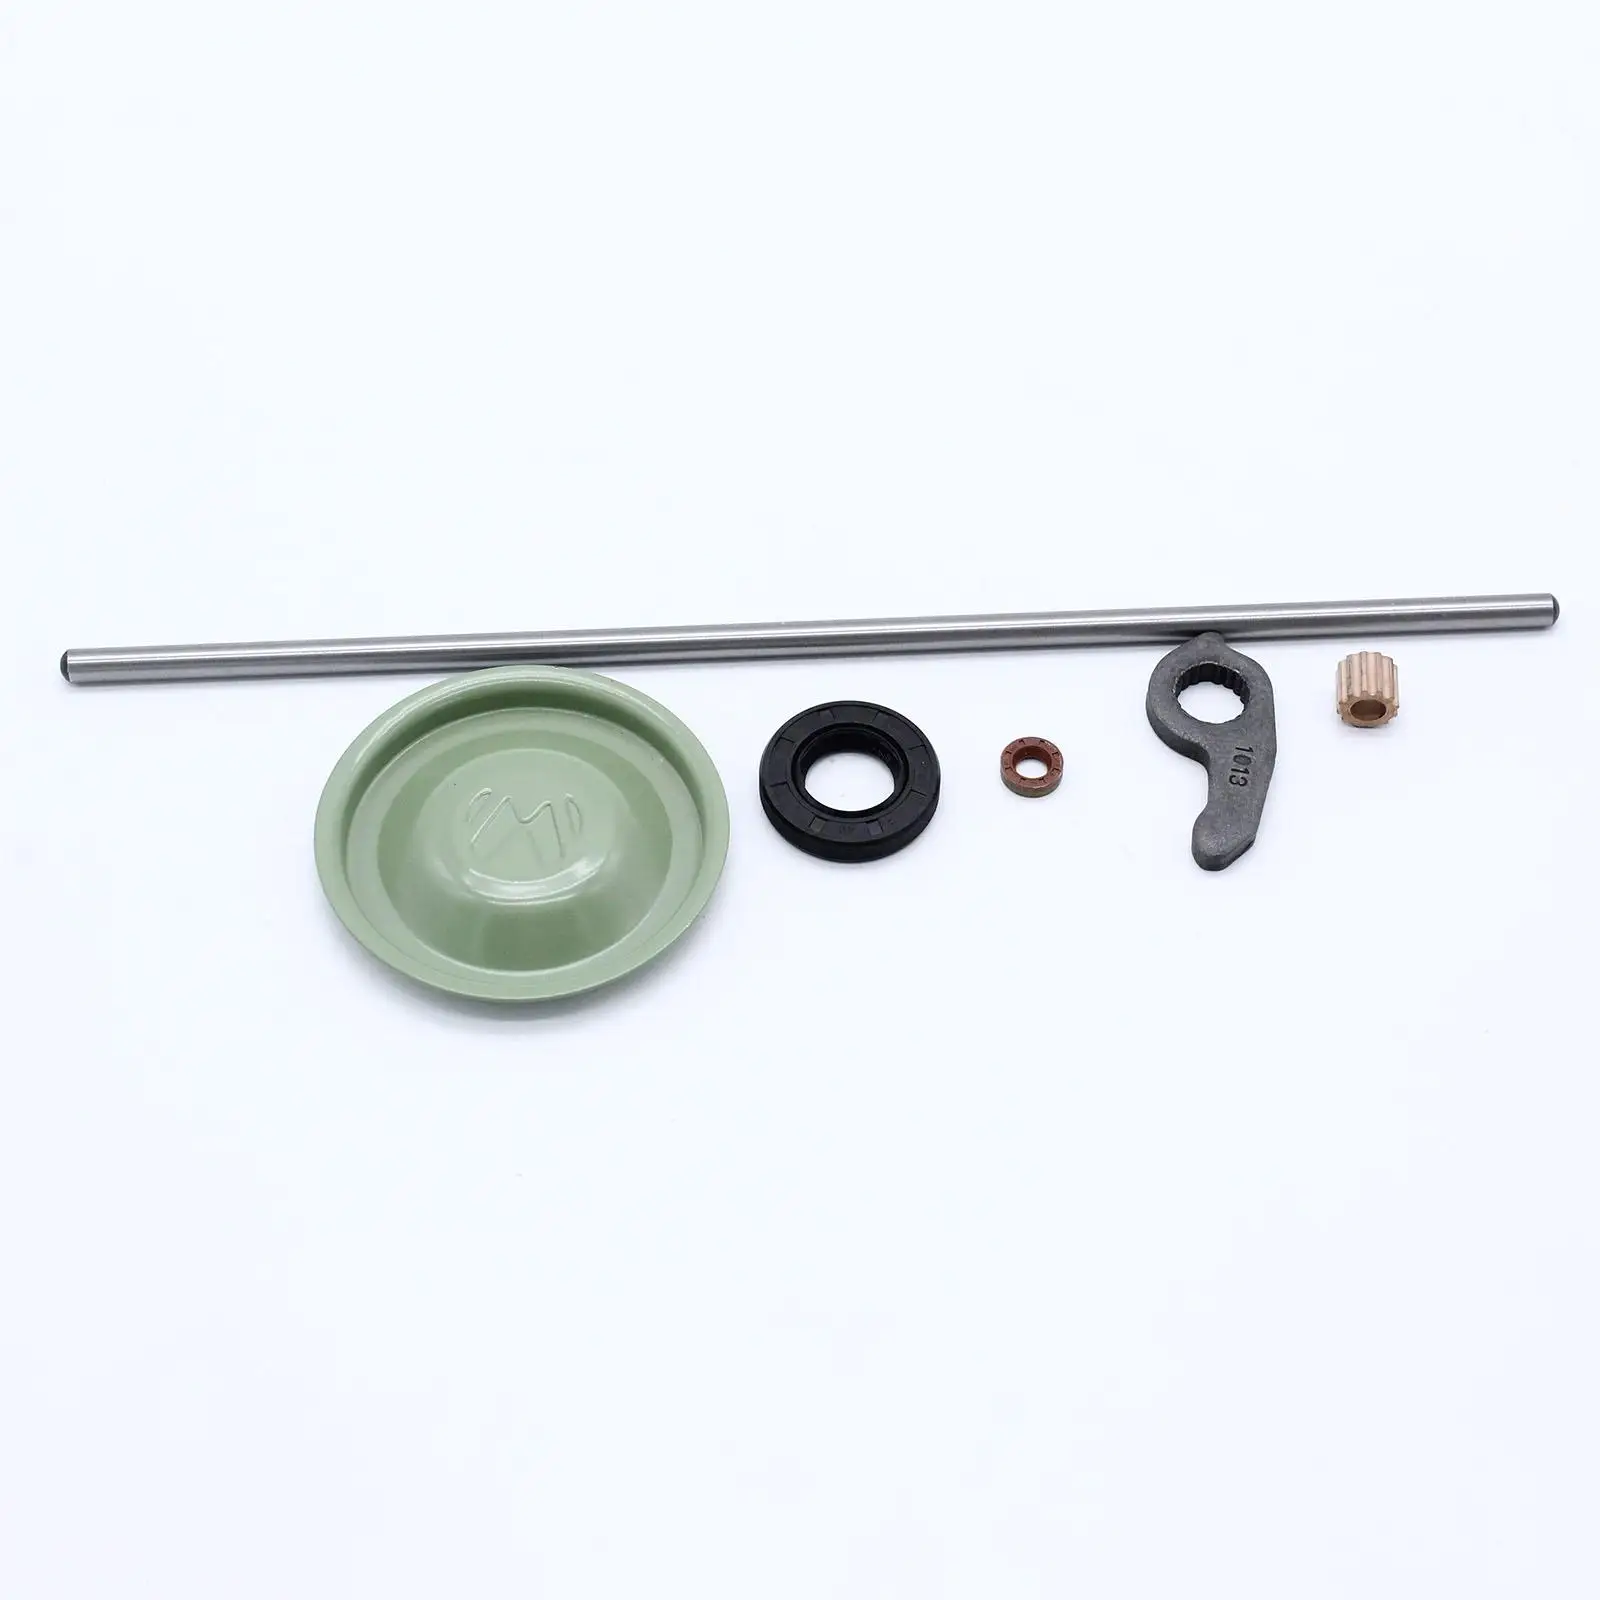 Clutch Push Rod Lever Green Caps Release Bearing Kits Clutch Pushrod Lever Kit for Golf MK1